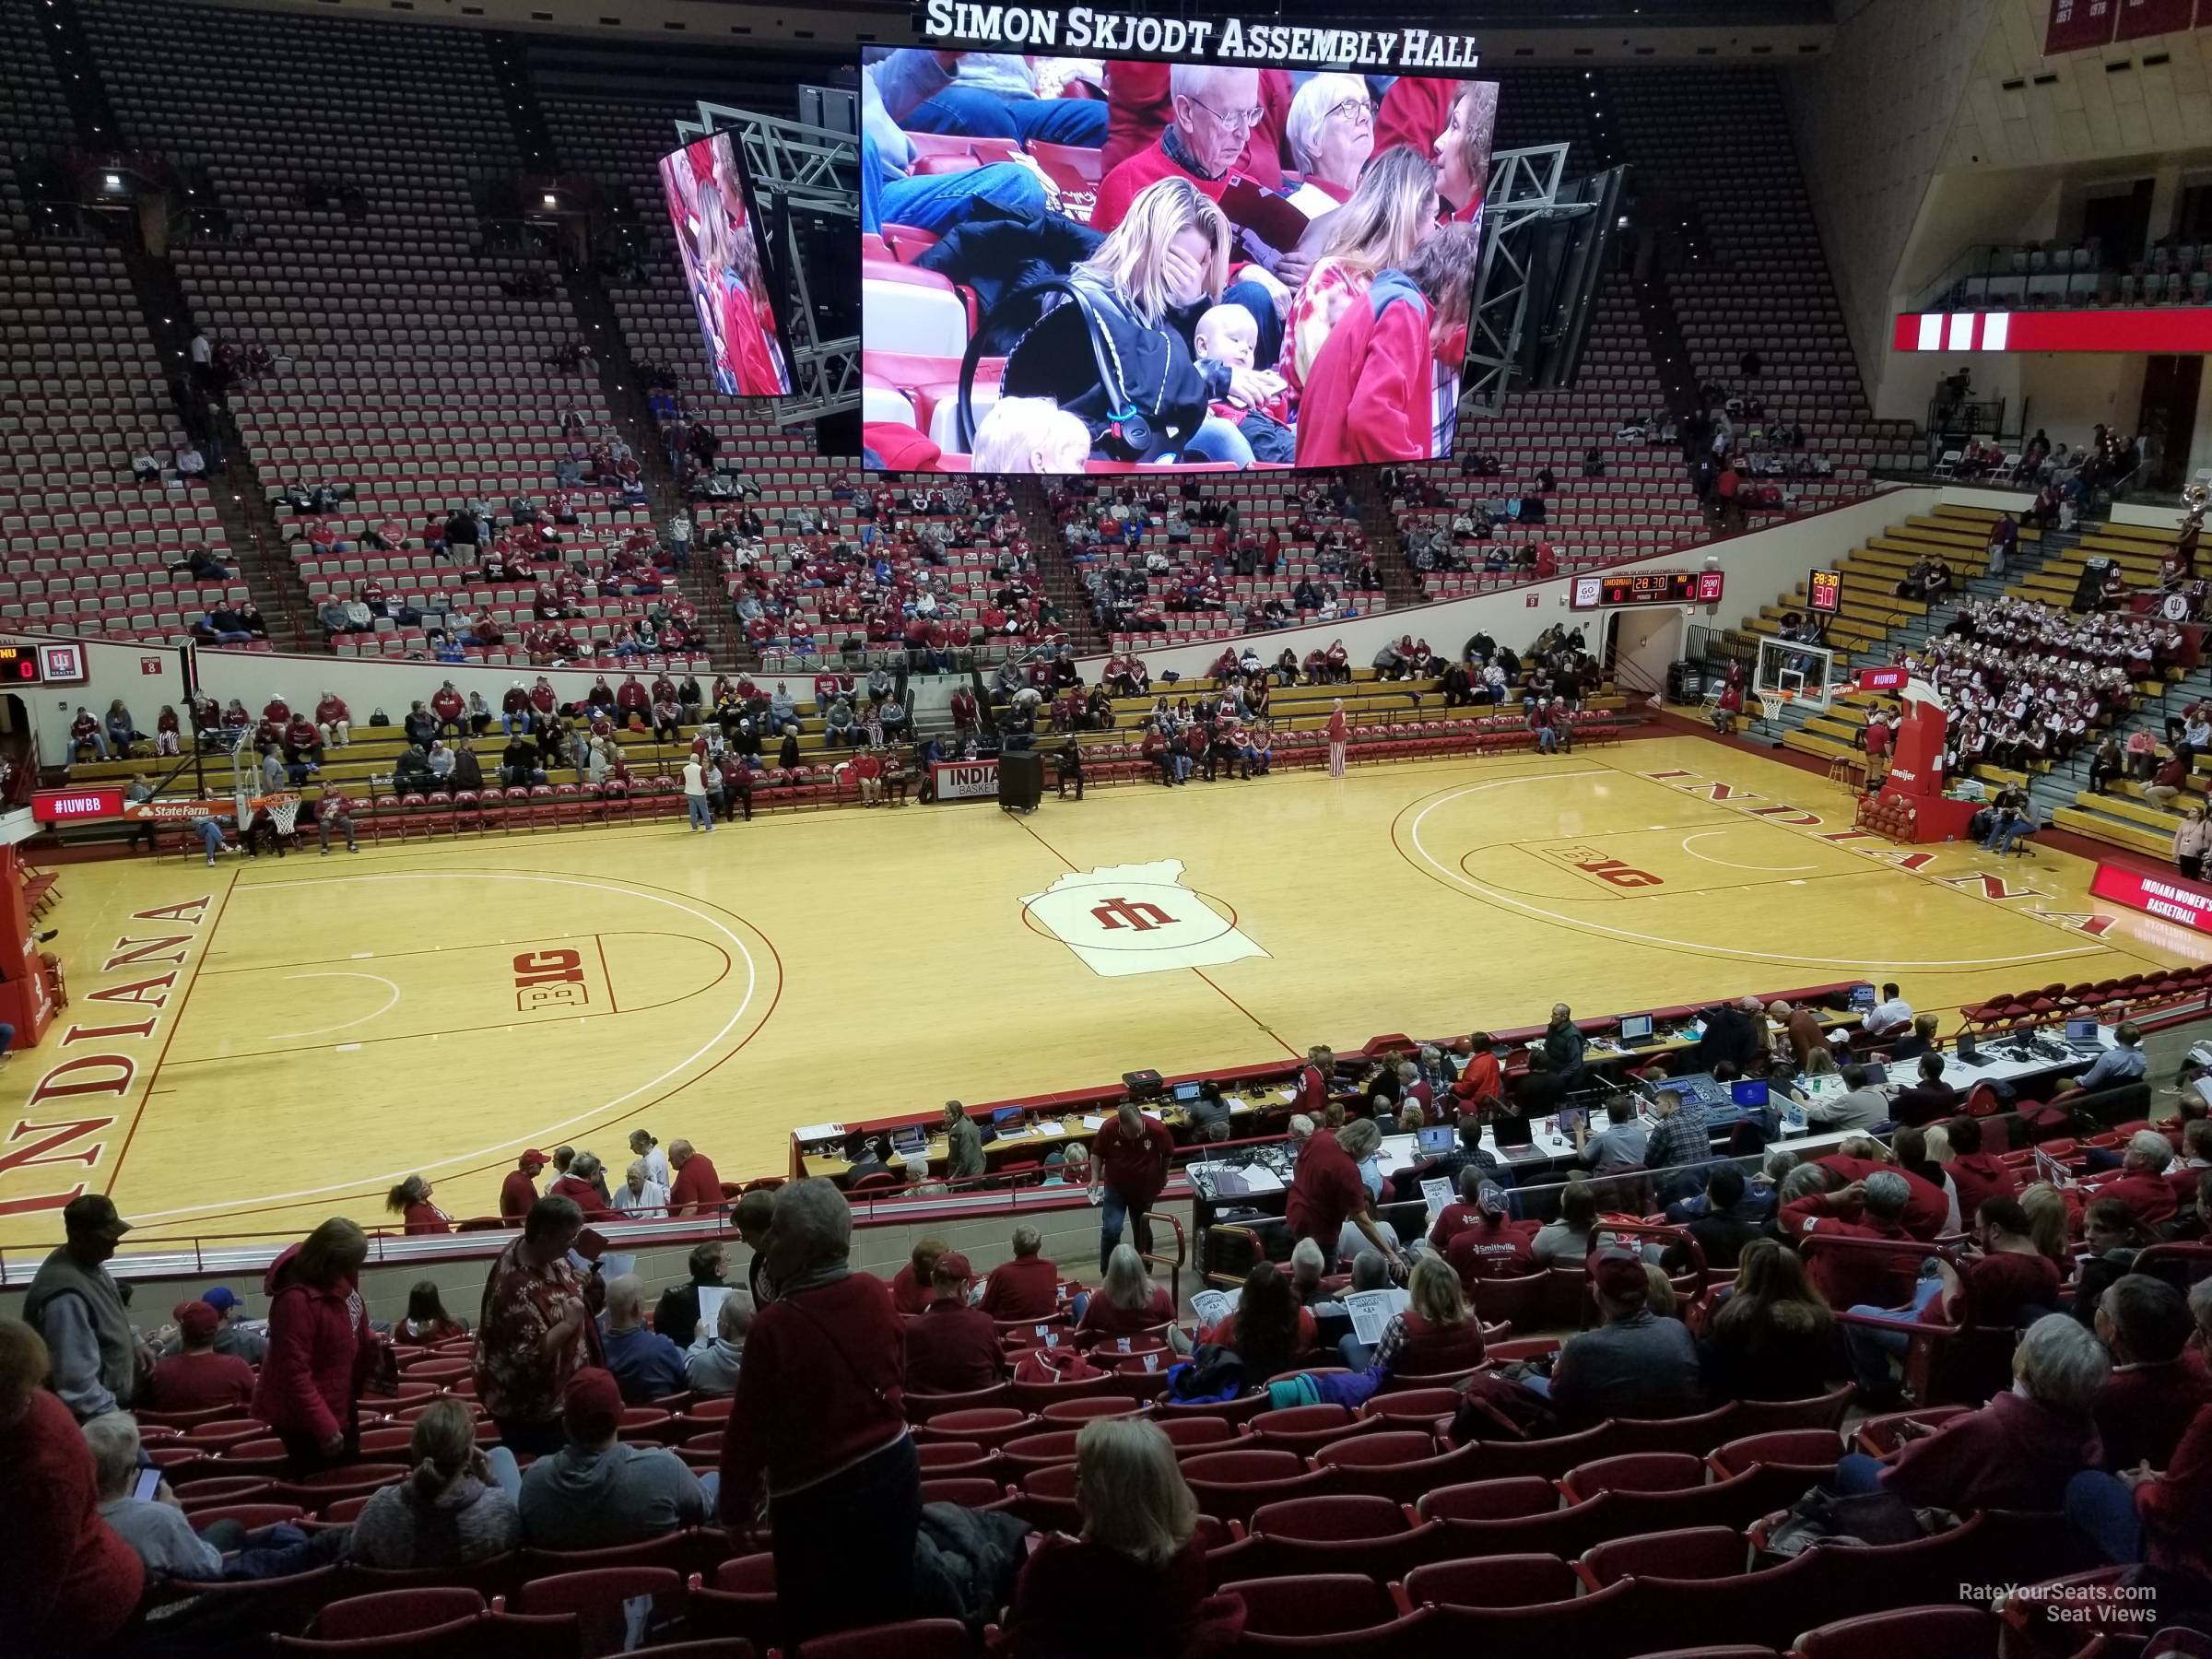 section d, row 15 seat view  - assembly hall